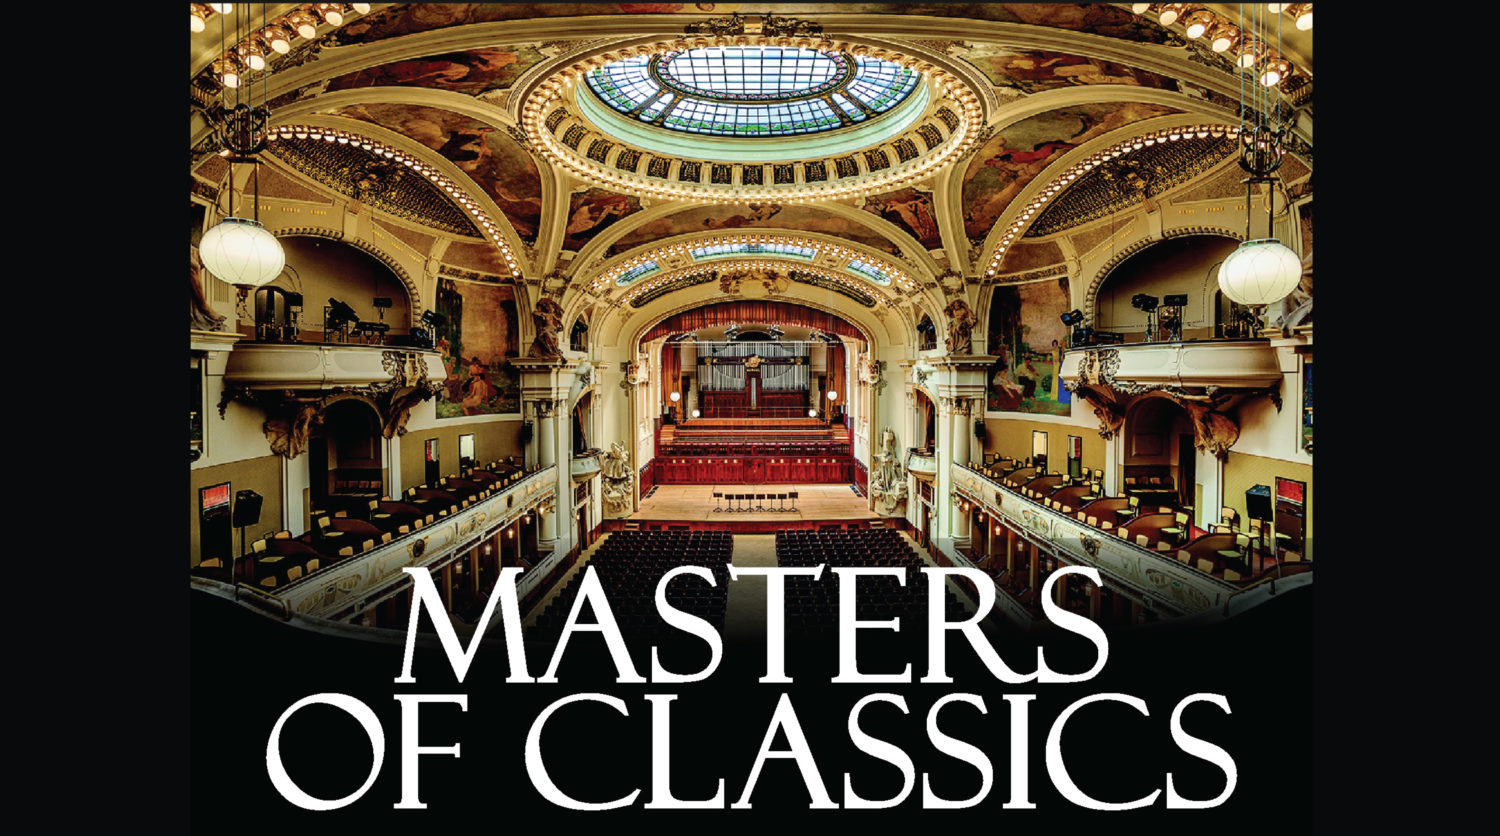 MASTERS OF CLASSICS IN THE MUNICIPAL HOUSE 16.07.2020 - přesun z 02.04.2020